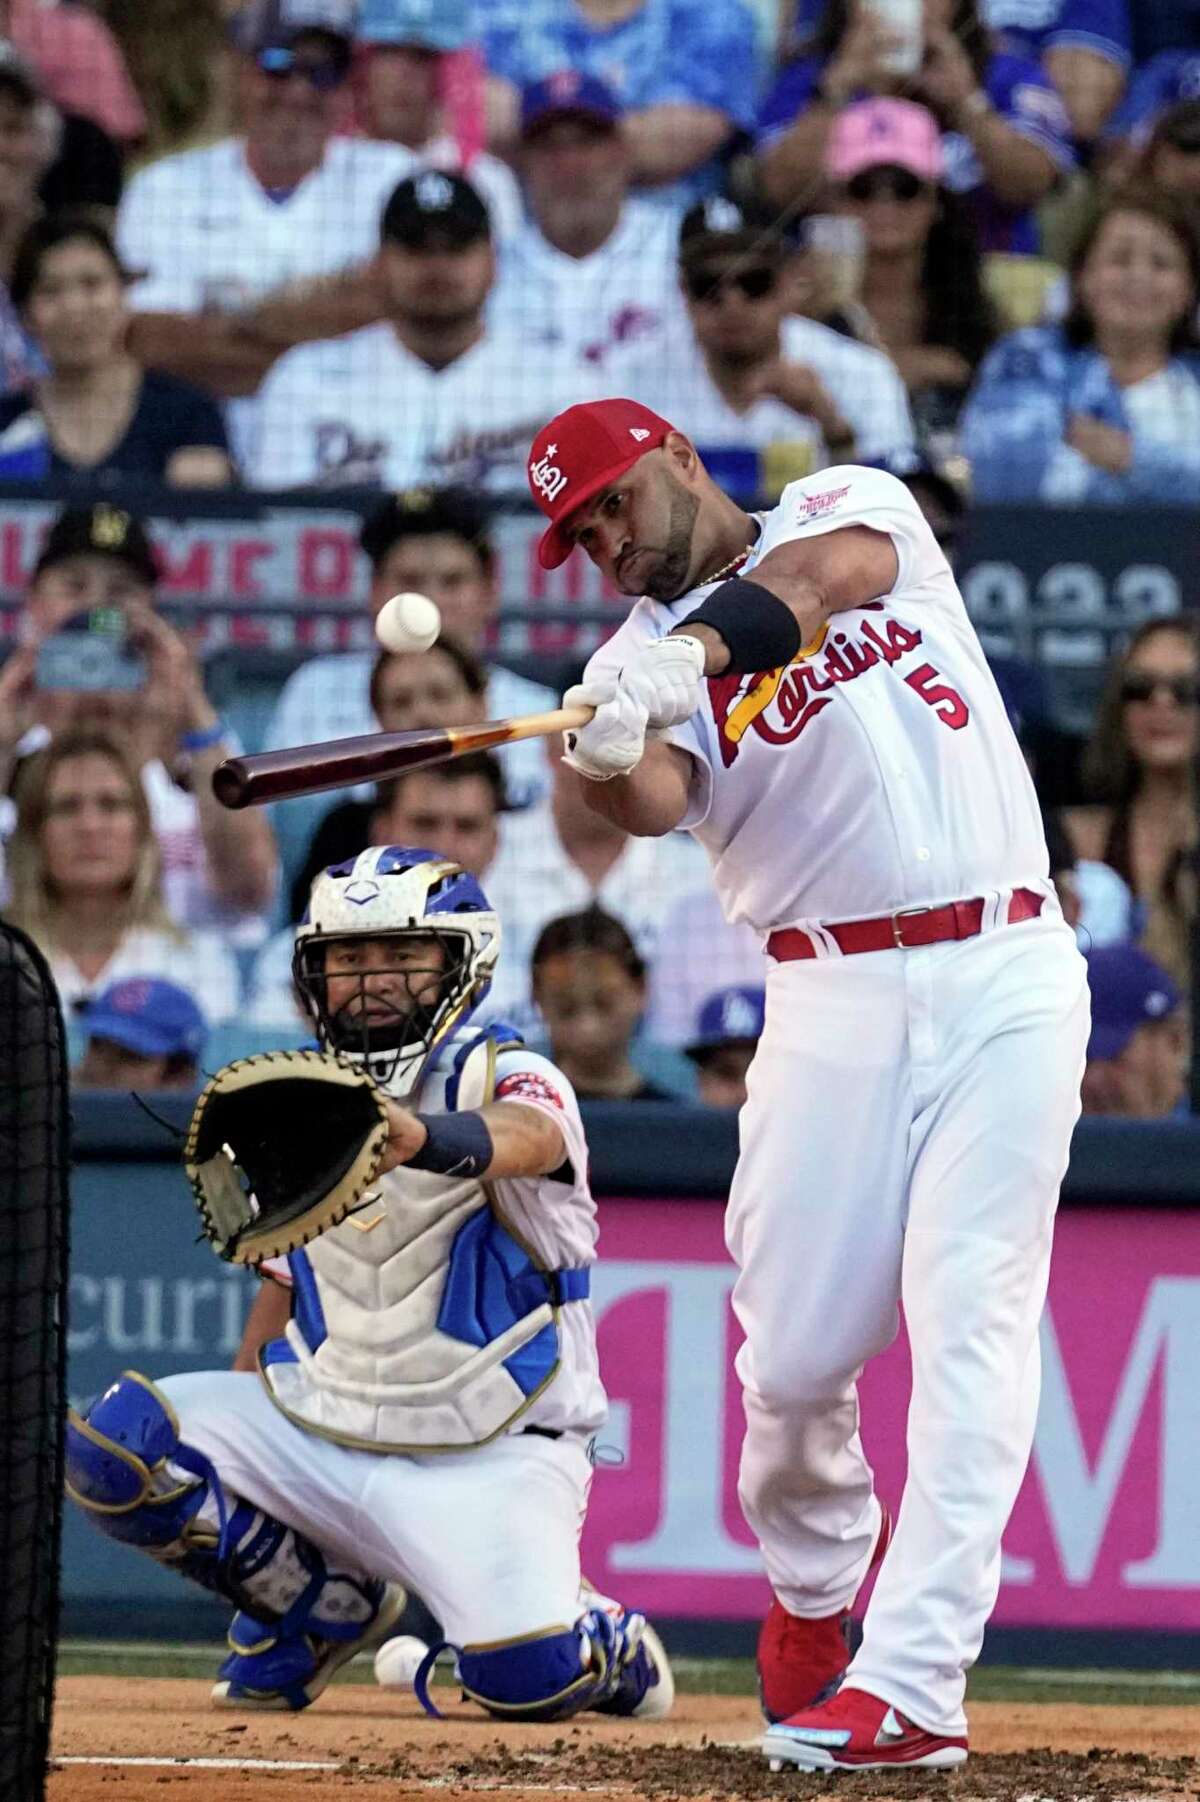 National League's Albert Pujols, of the St. Louis Cardinals, bats during the MLB All-Star baseball Home Run Derby, Monday, July 18, 2022, in Los Angeles. (AP Photo/Jae C. Hong)